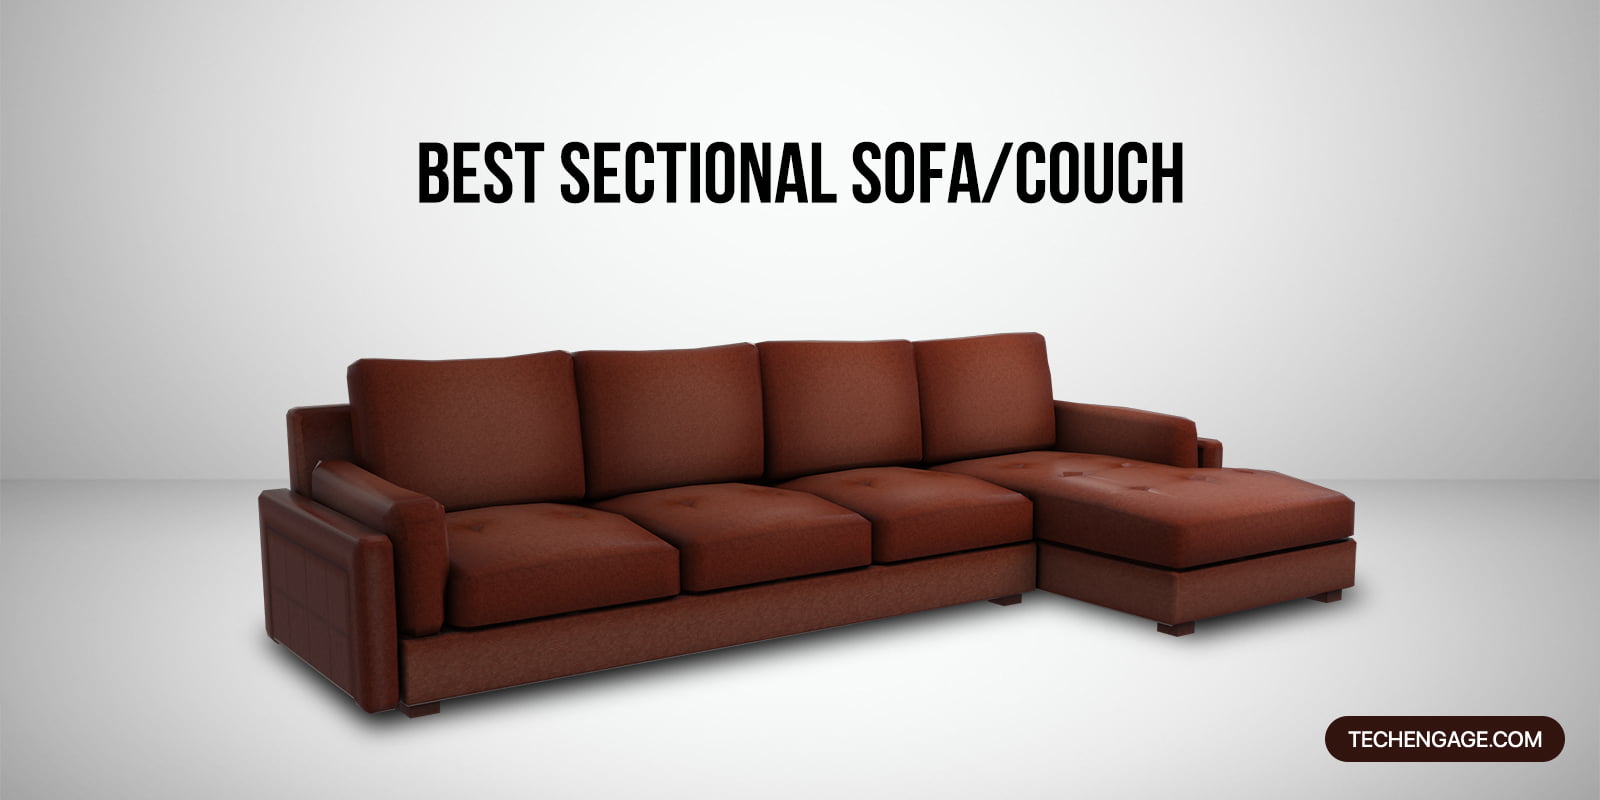 Best Sectional Sofa/Couch On Amazon For 2023